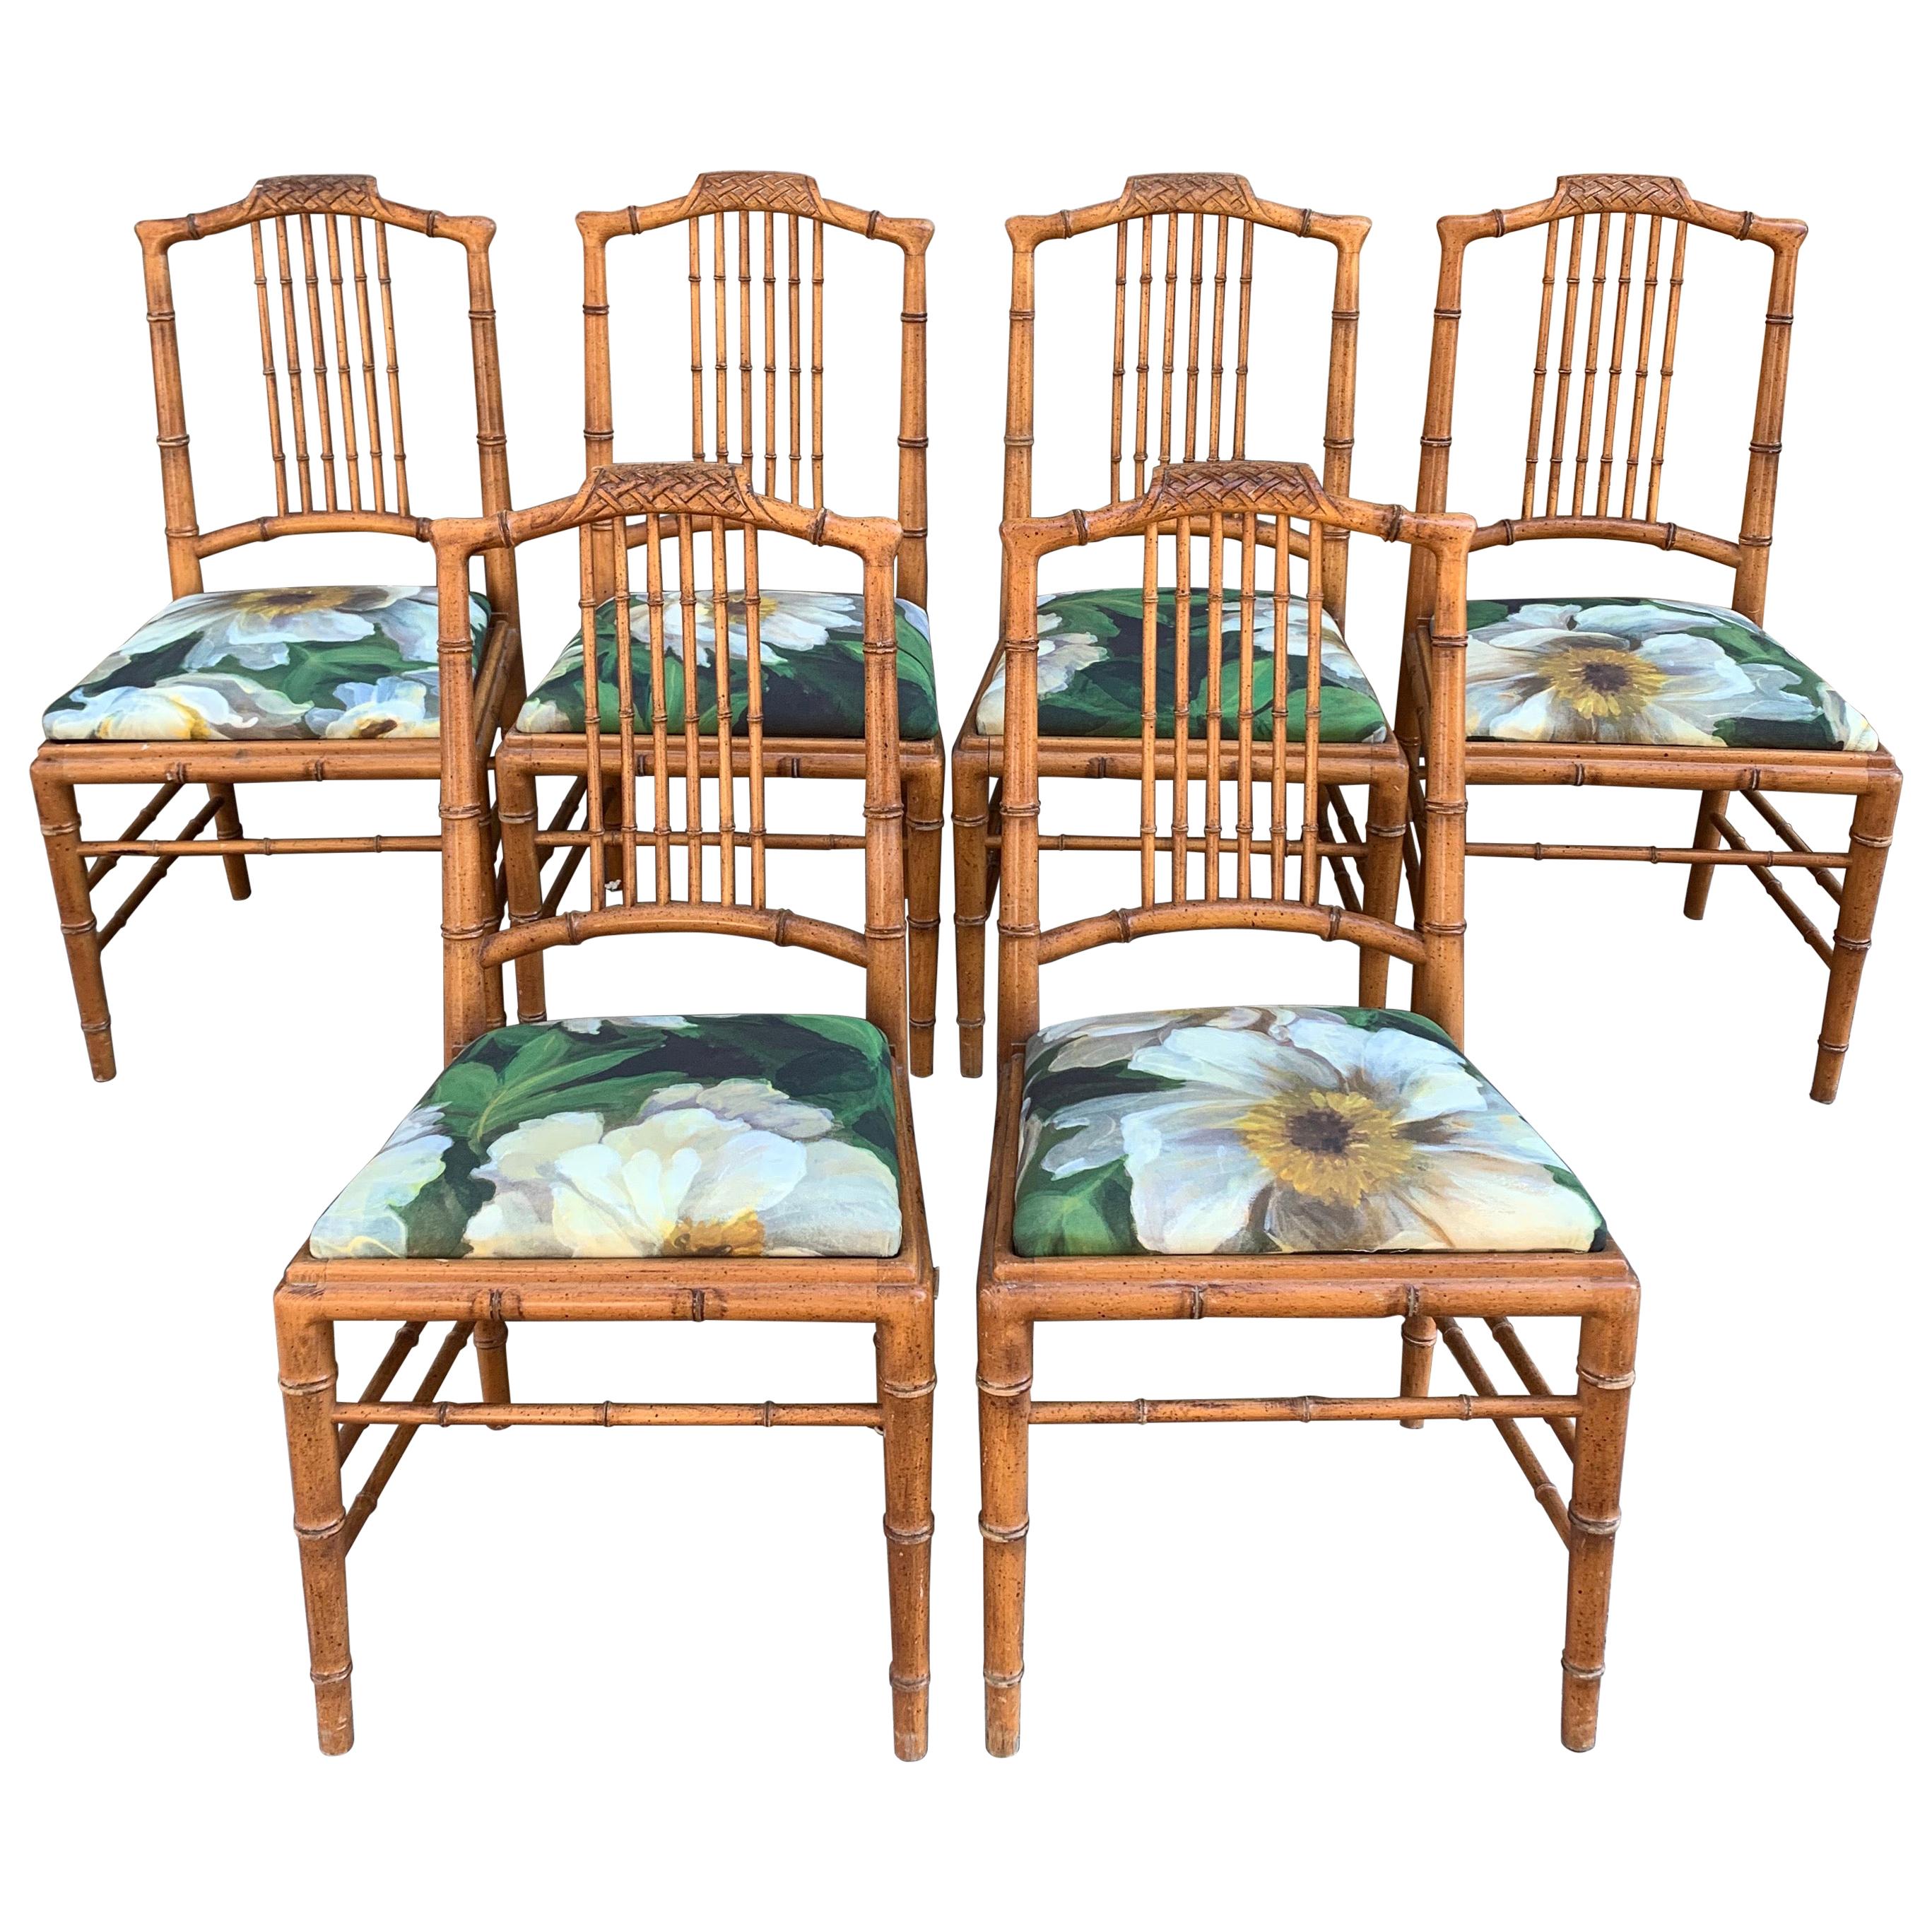 Set of 6 Italian Bamboo Dining Chairs Newly Upholstered in Floral Fabric, 1950s